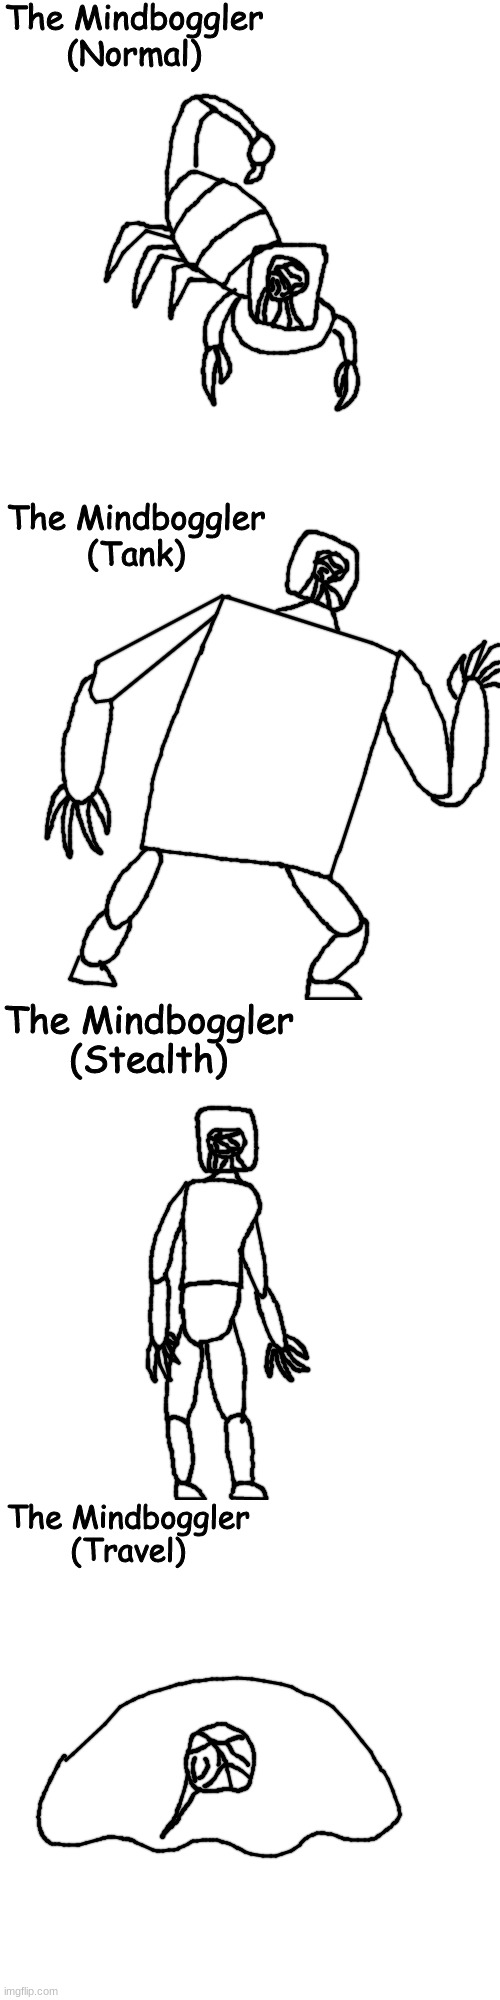 image tagged in the mindboggler normal,the mindboggler tank,the mindboggler stealth,the mindboggler travel | made w/ Imgflip meme maker